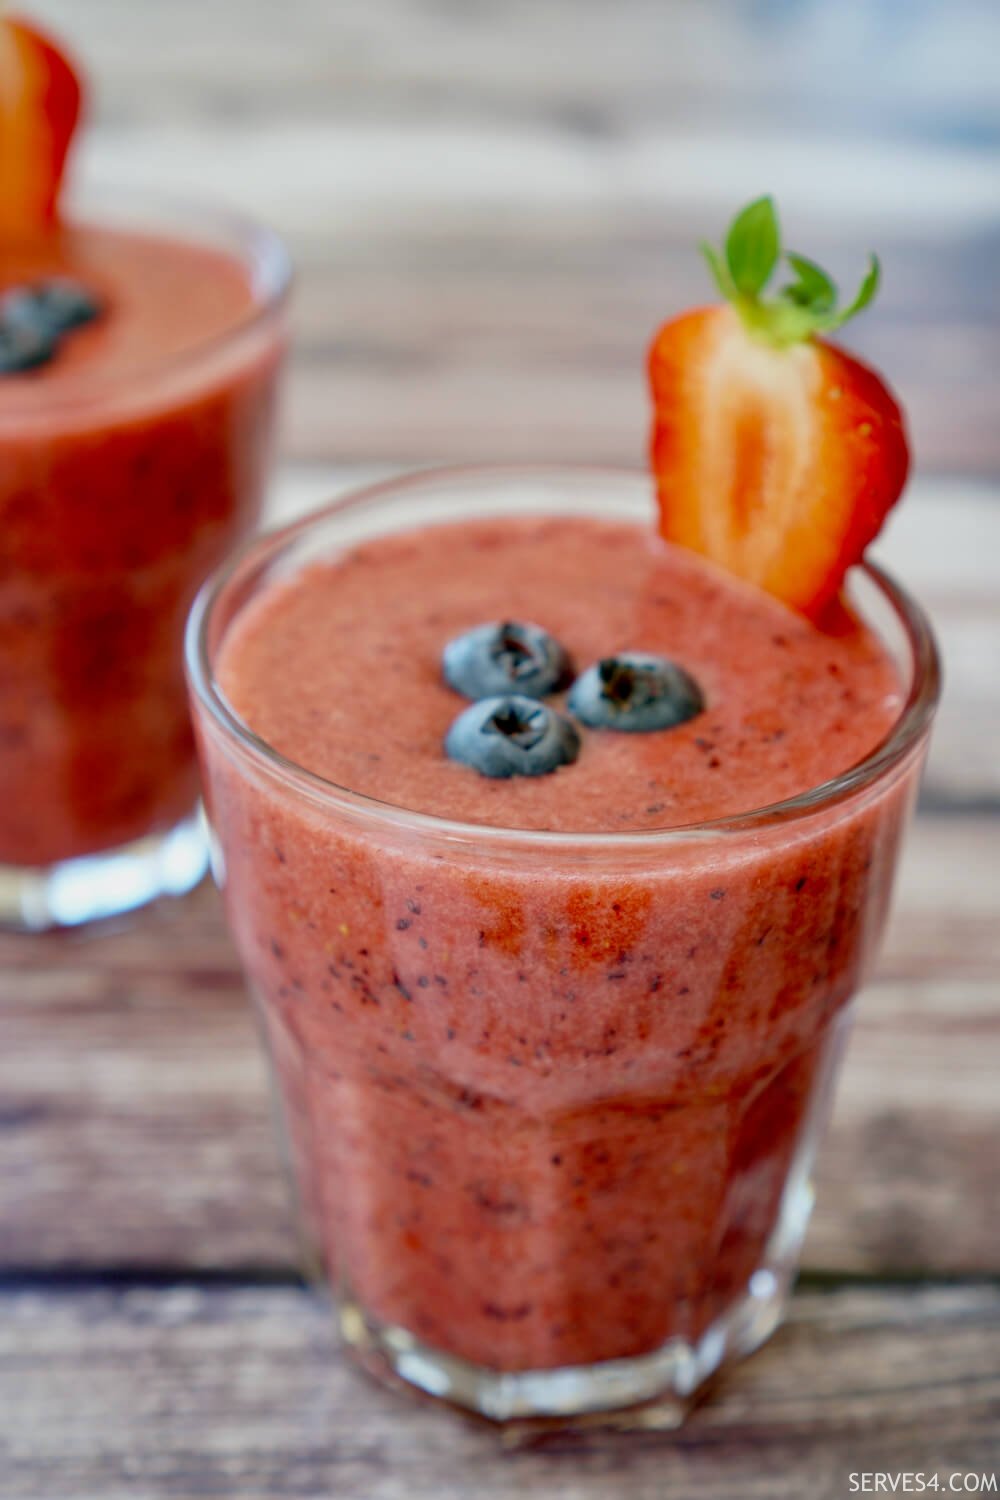 This strawberry and blueberry smoothie is a wonderful refreshment and an ideal way to enjoy your summer fruits!